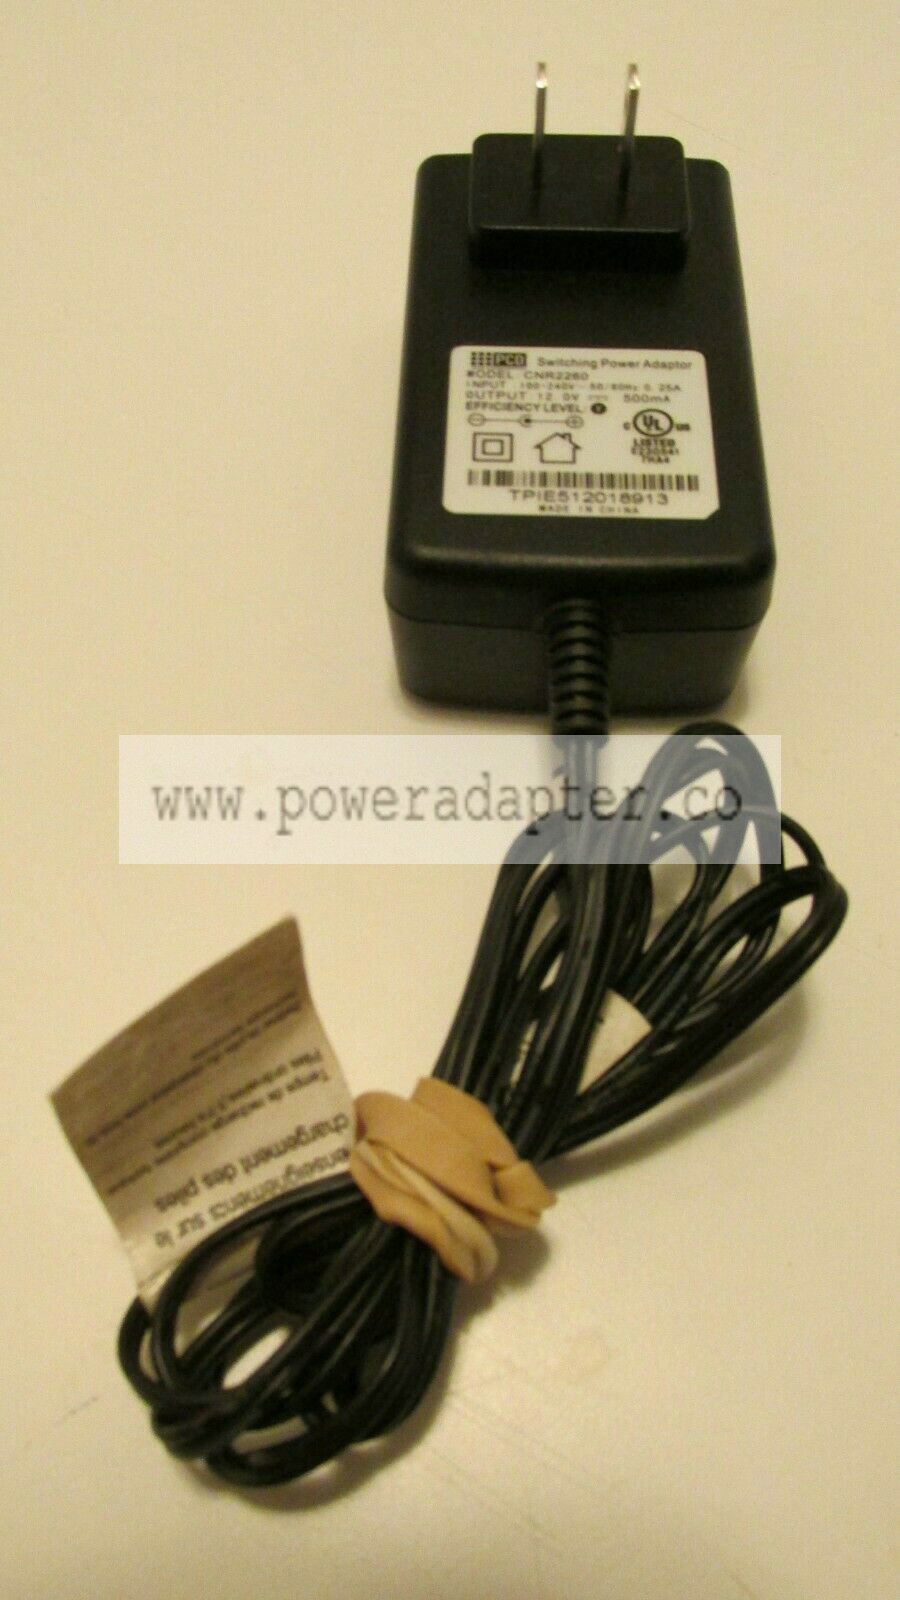 PCD Model CNR2260 Switching Power Adaptor AC-DC Output 12V 500mA TESTED Brand: PCD Country/Region of Manufacture: Ch